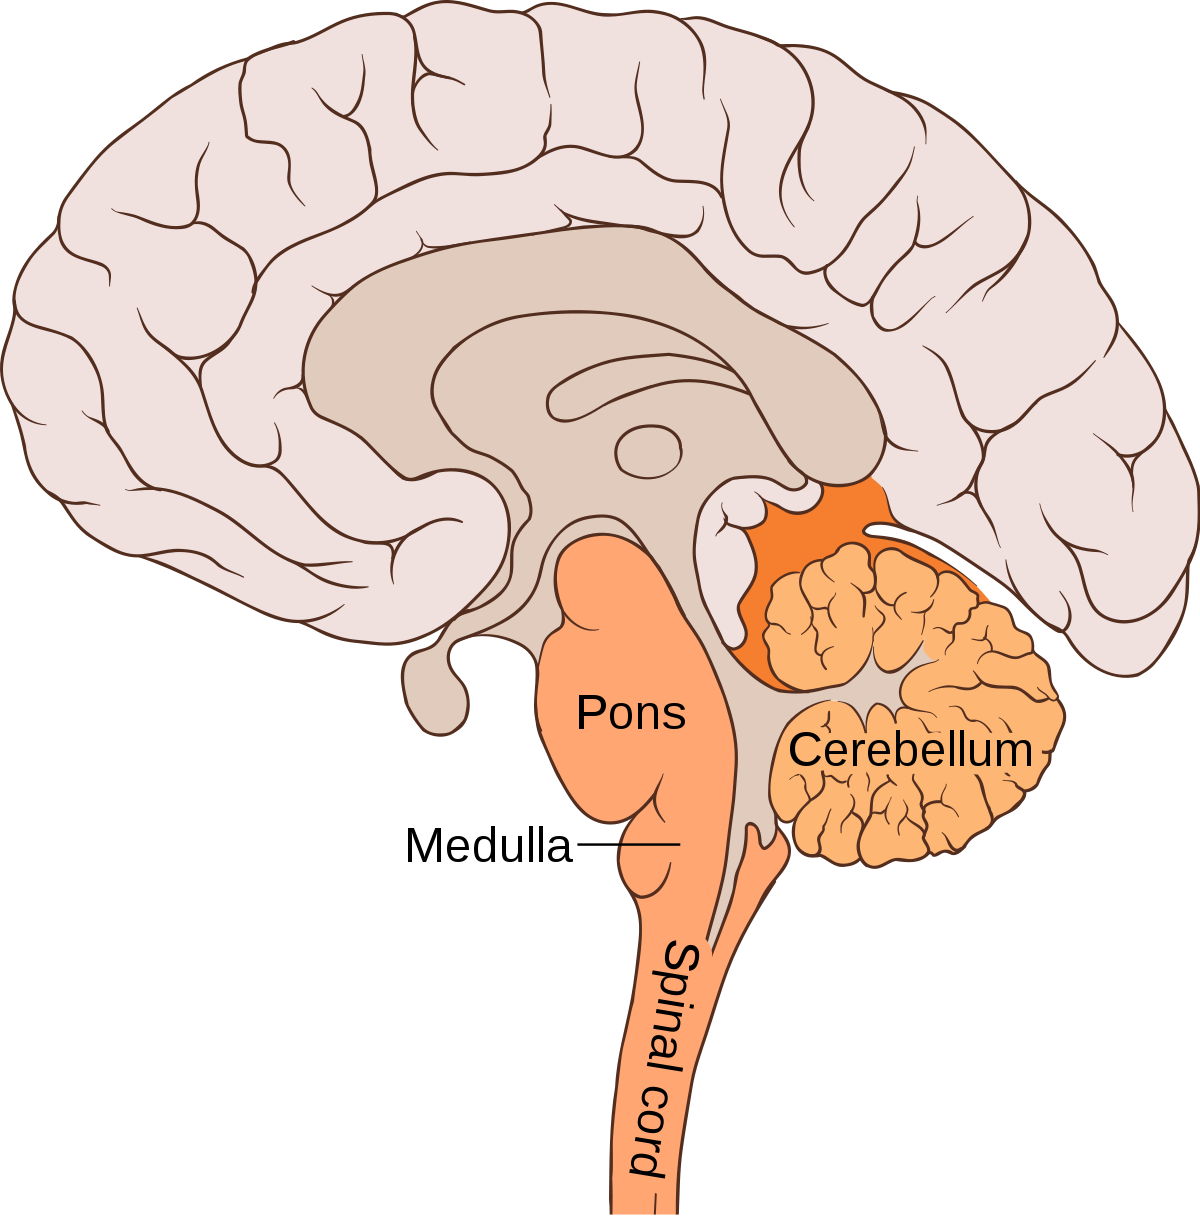 <p>the larger swelling above the medulla that connects the top of the brain to the bottom and that plays a part in sleep, dreaming, left-right body coordination, and arousal. </p>